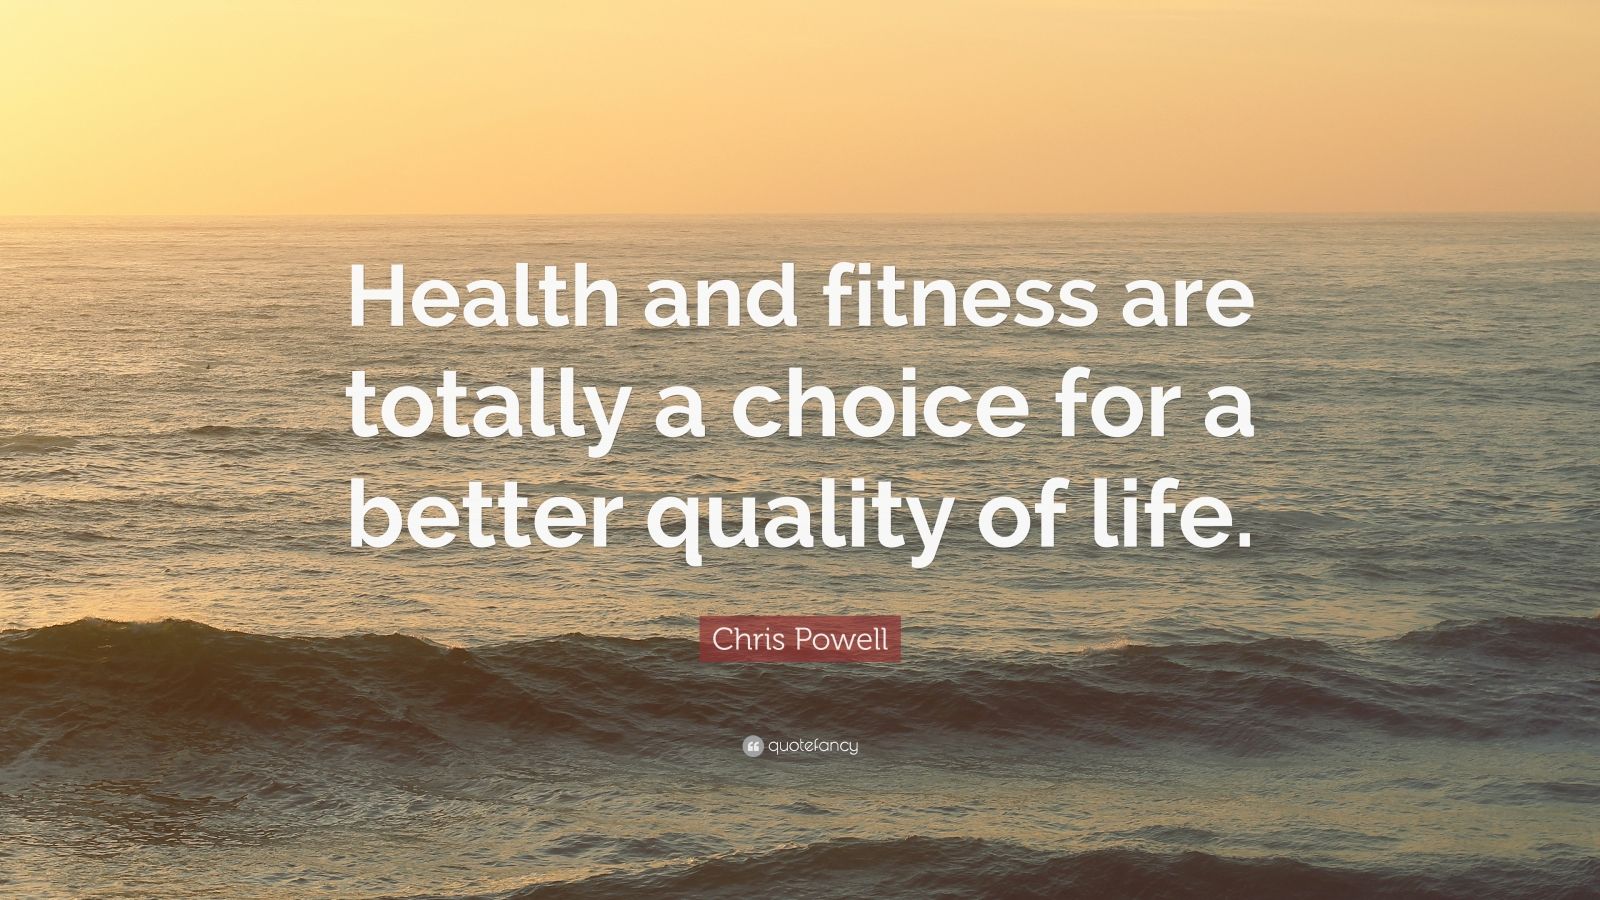 Chris Powell Quote “health And Fitness Are Totally A Choice For A Better Quality Of Life ”